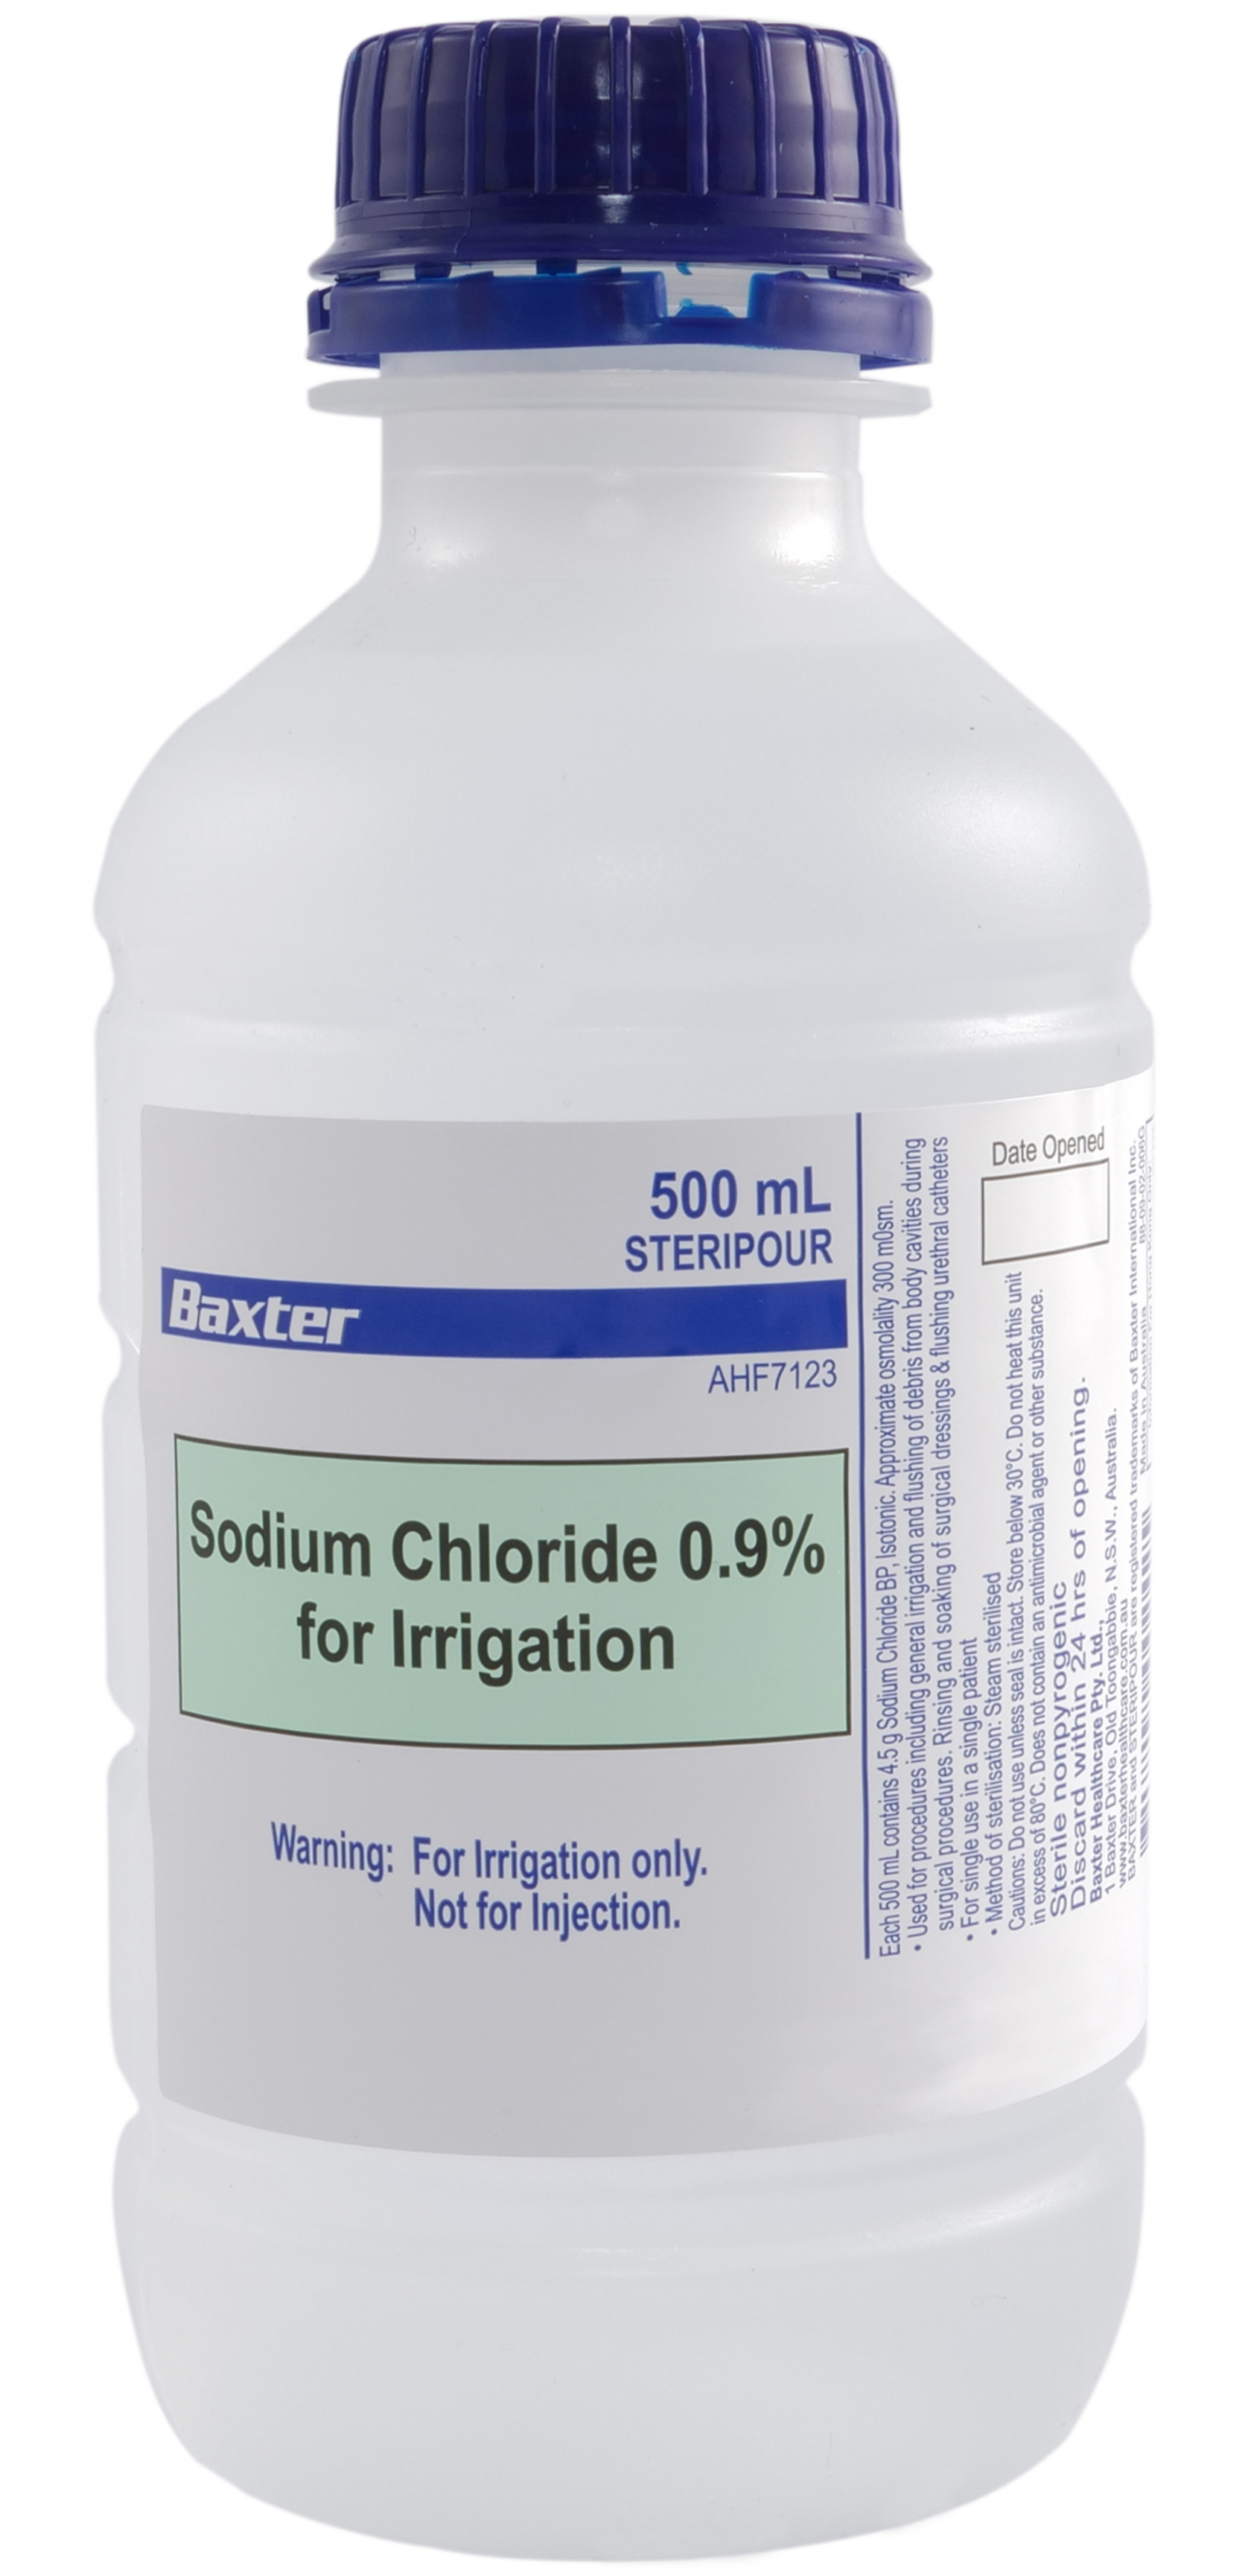 Sodium Chloride 0.9% Steripour Irrigation 500ml image 0